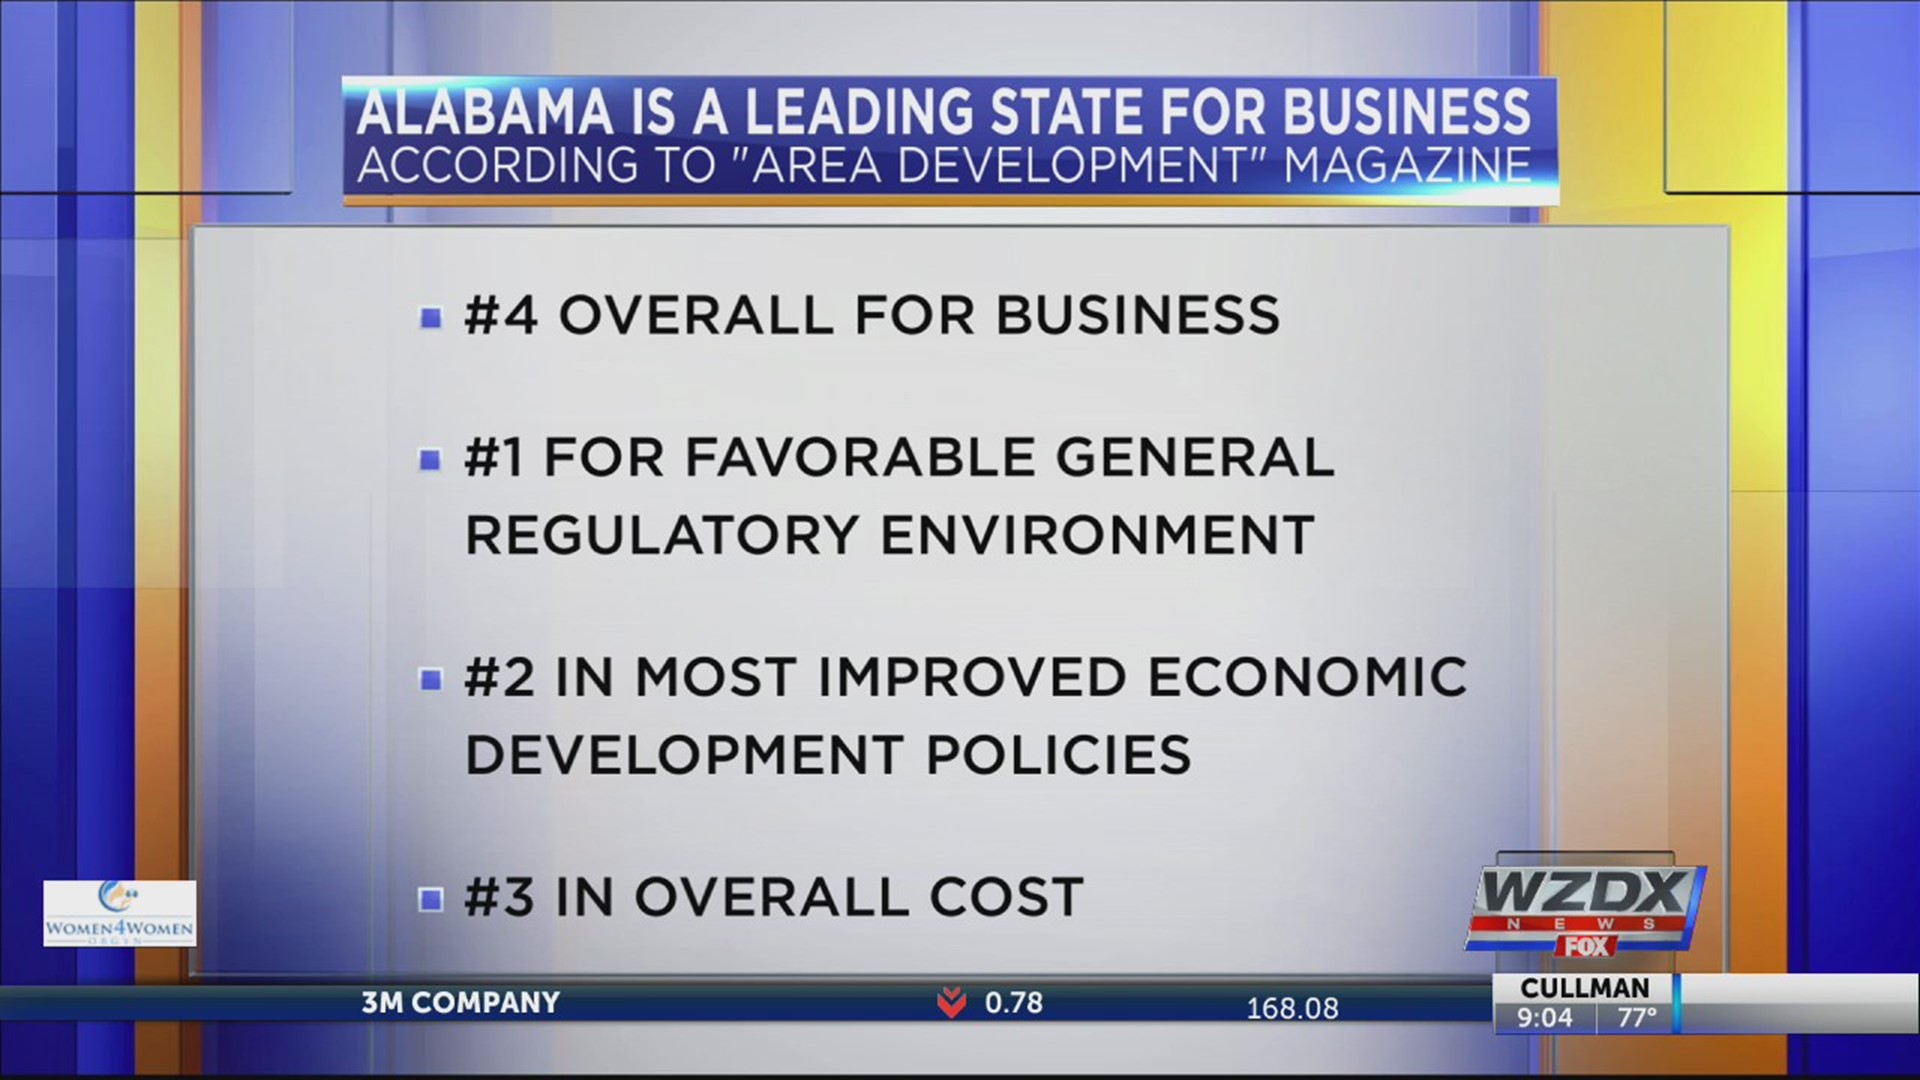 Alabama is once again among the nation's leading states for business.